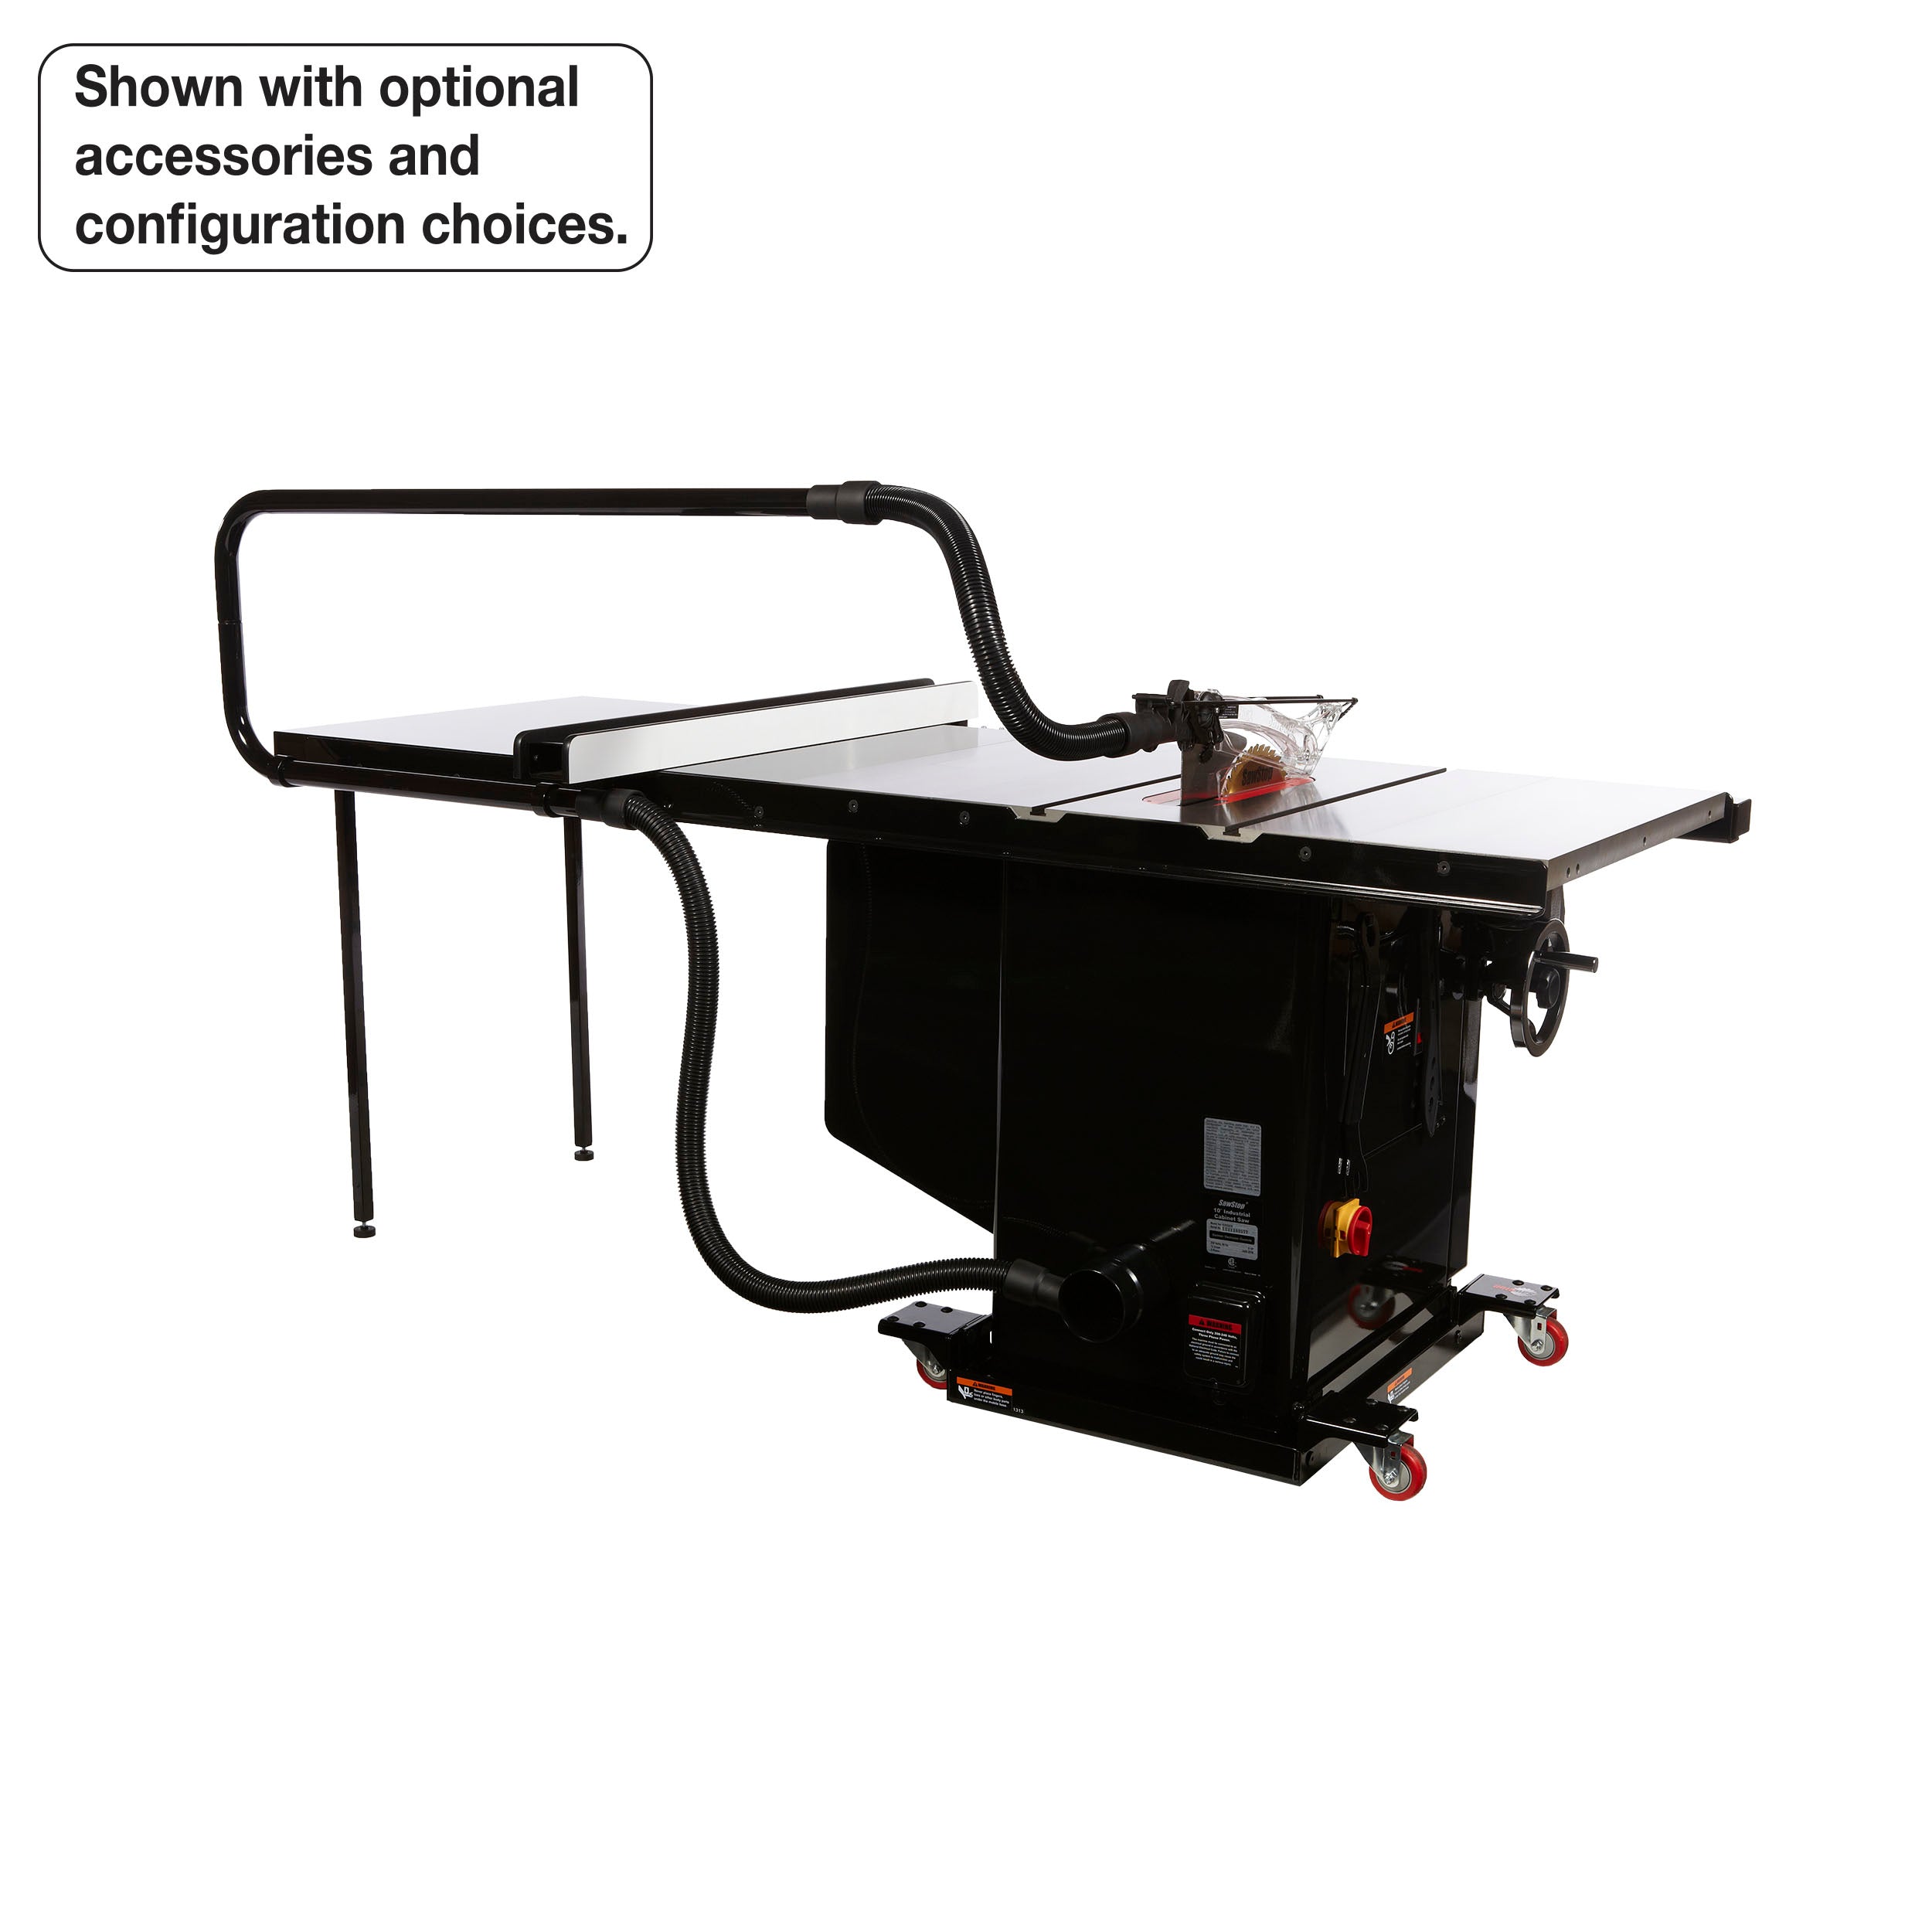 SawStop 5HP, 3ph, 230v Industrial Cabinet Saw w/ 36